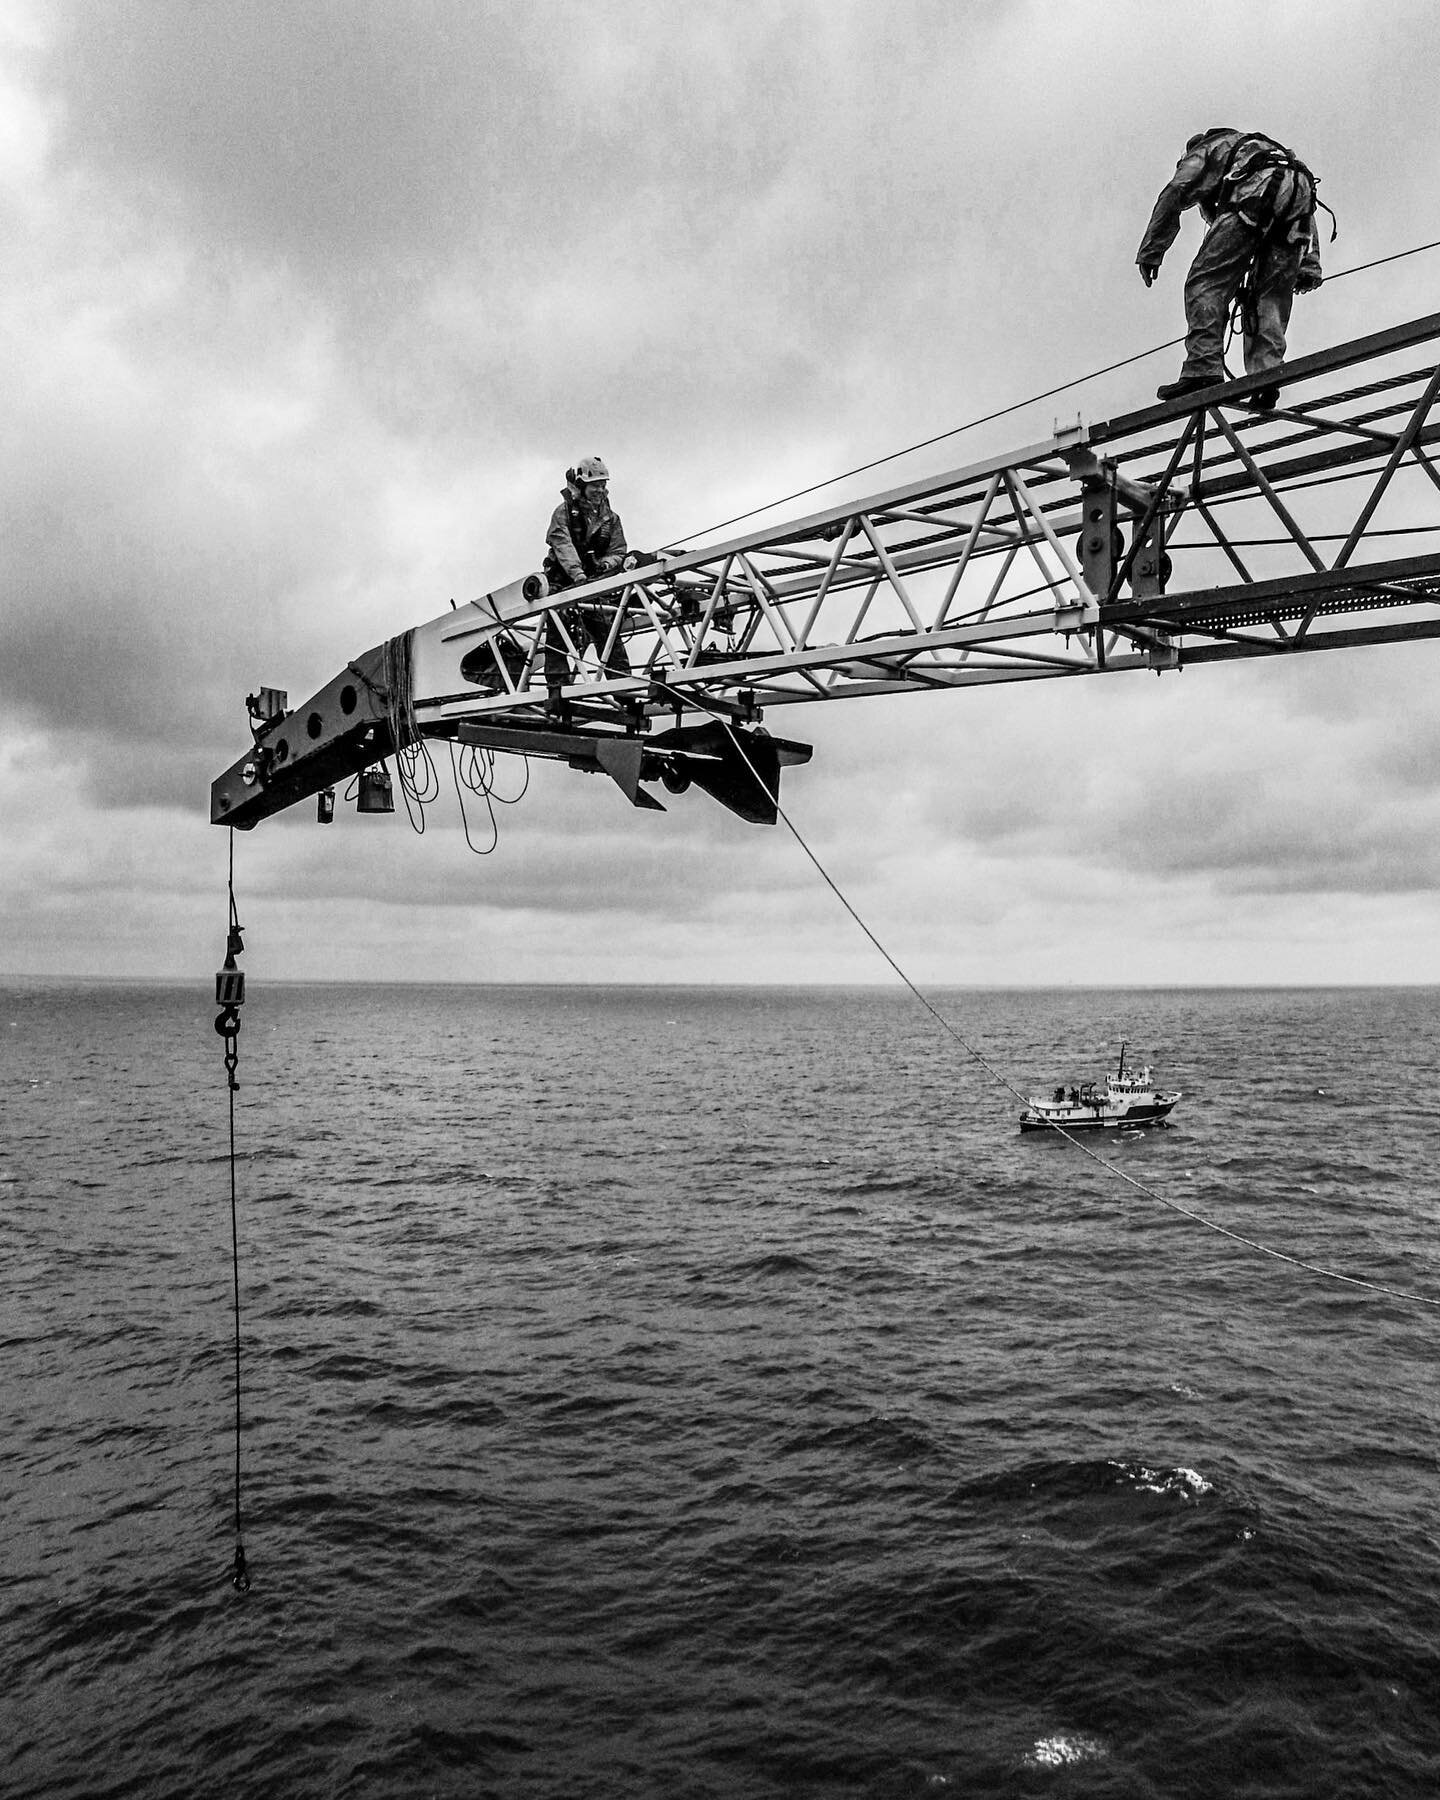 Rope access techs replacing crane guy wires. I did not taken the picture because I was on the tip of the crane😉. I did ask the guy to stand there and take the photo. So it sort of is mine😂. 

#ropeaccess #photography #blackandwhite #irata #petzlpro